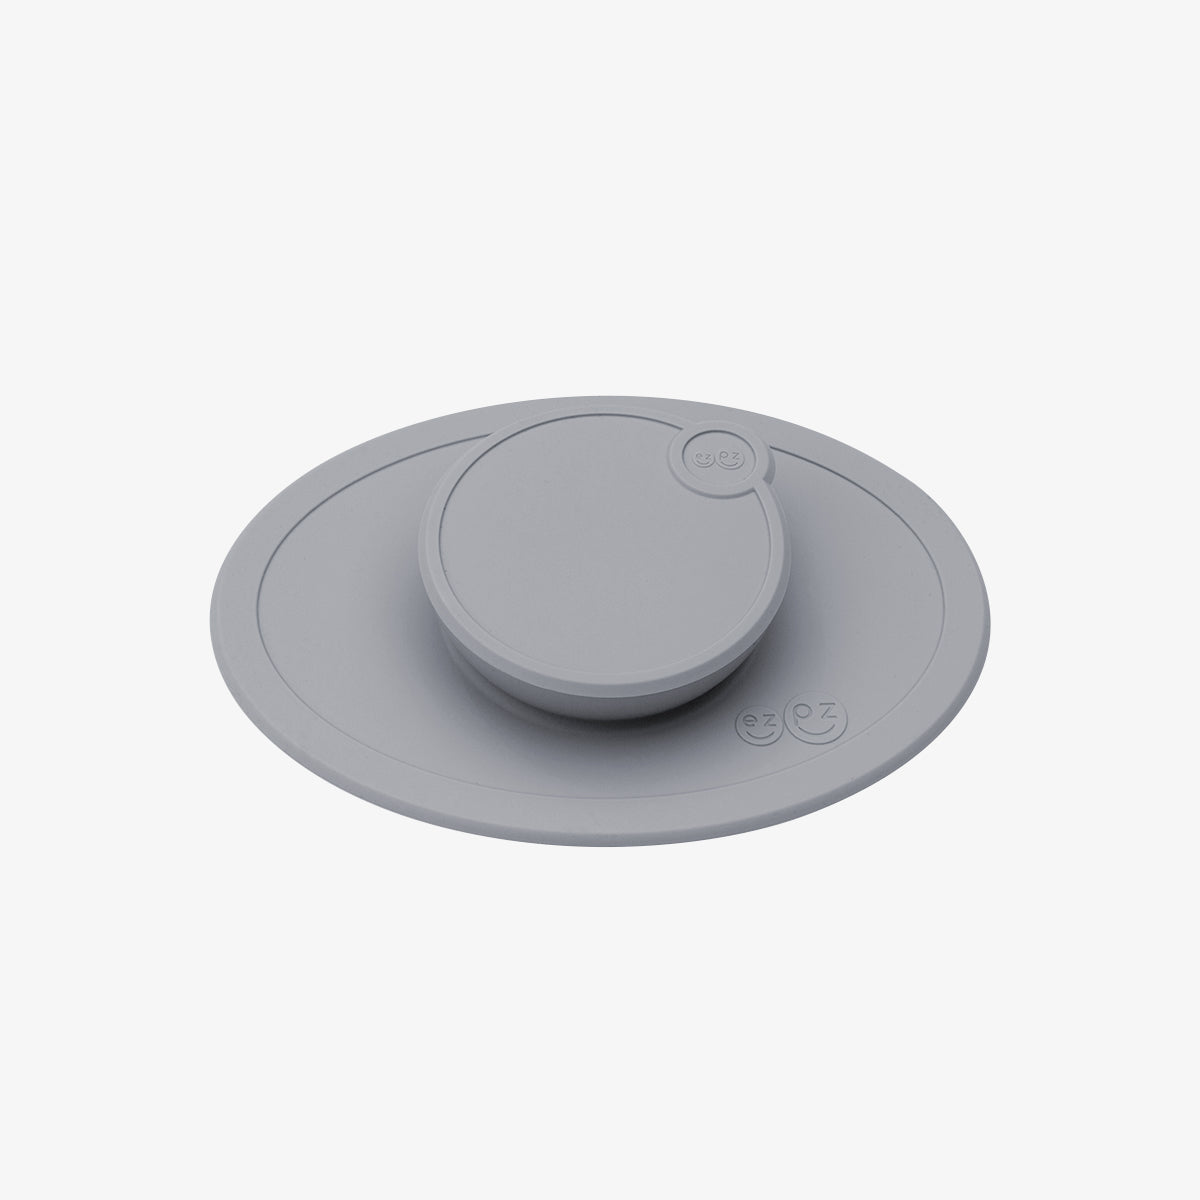 Tiny Bowl Lid in Gray / Storage Lids for the Tiny Bowl by ezpz / Silicone Lid for Baby Bowl